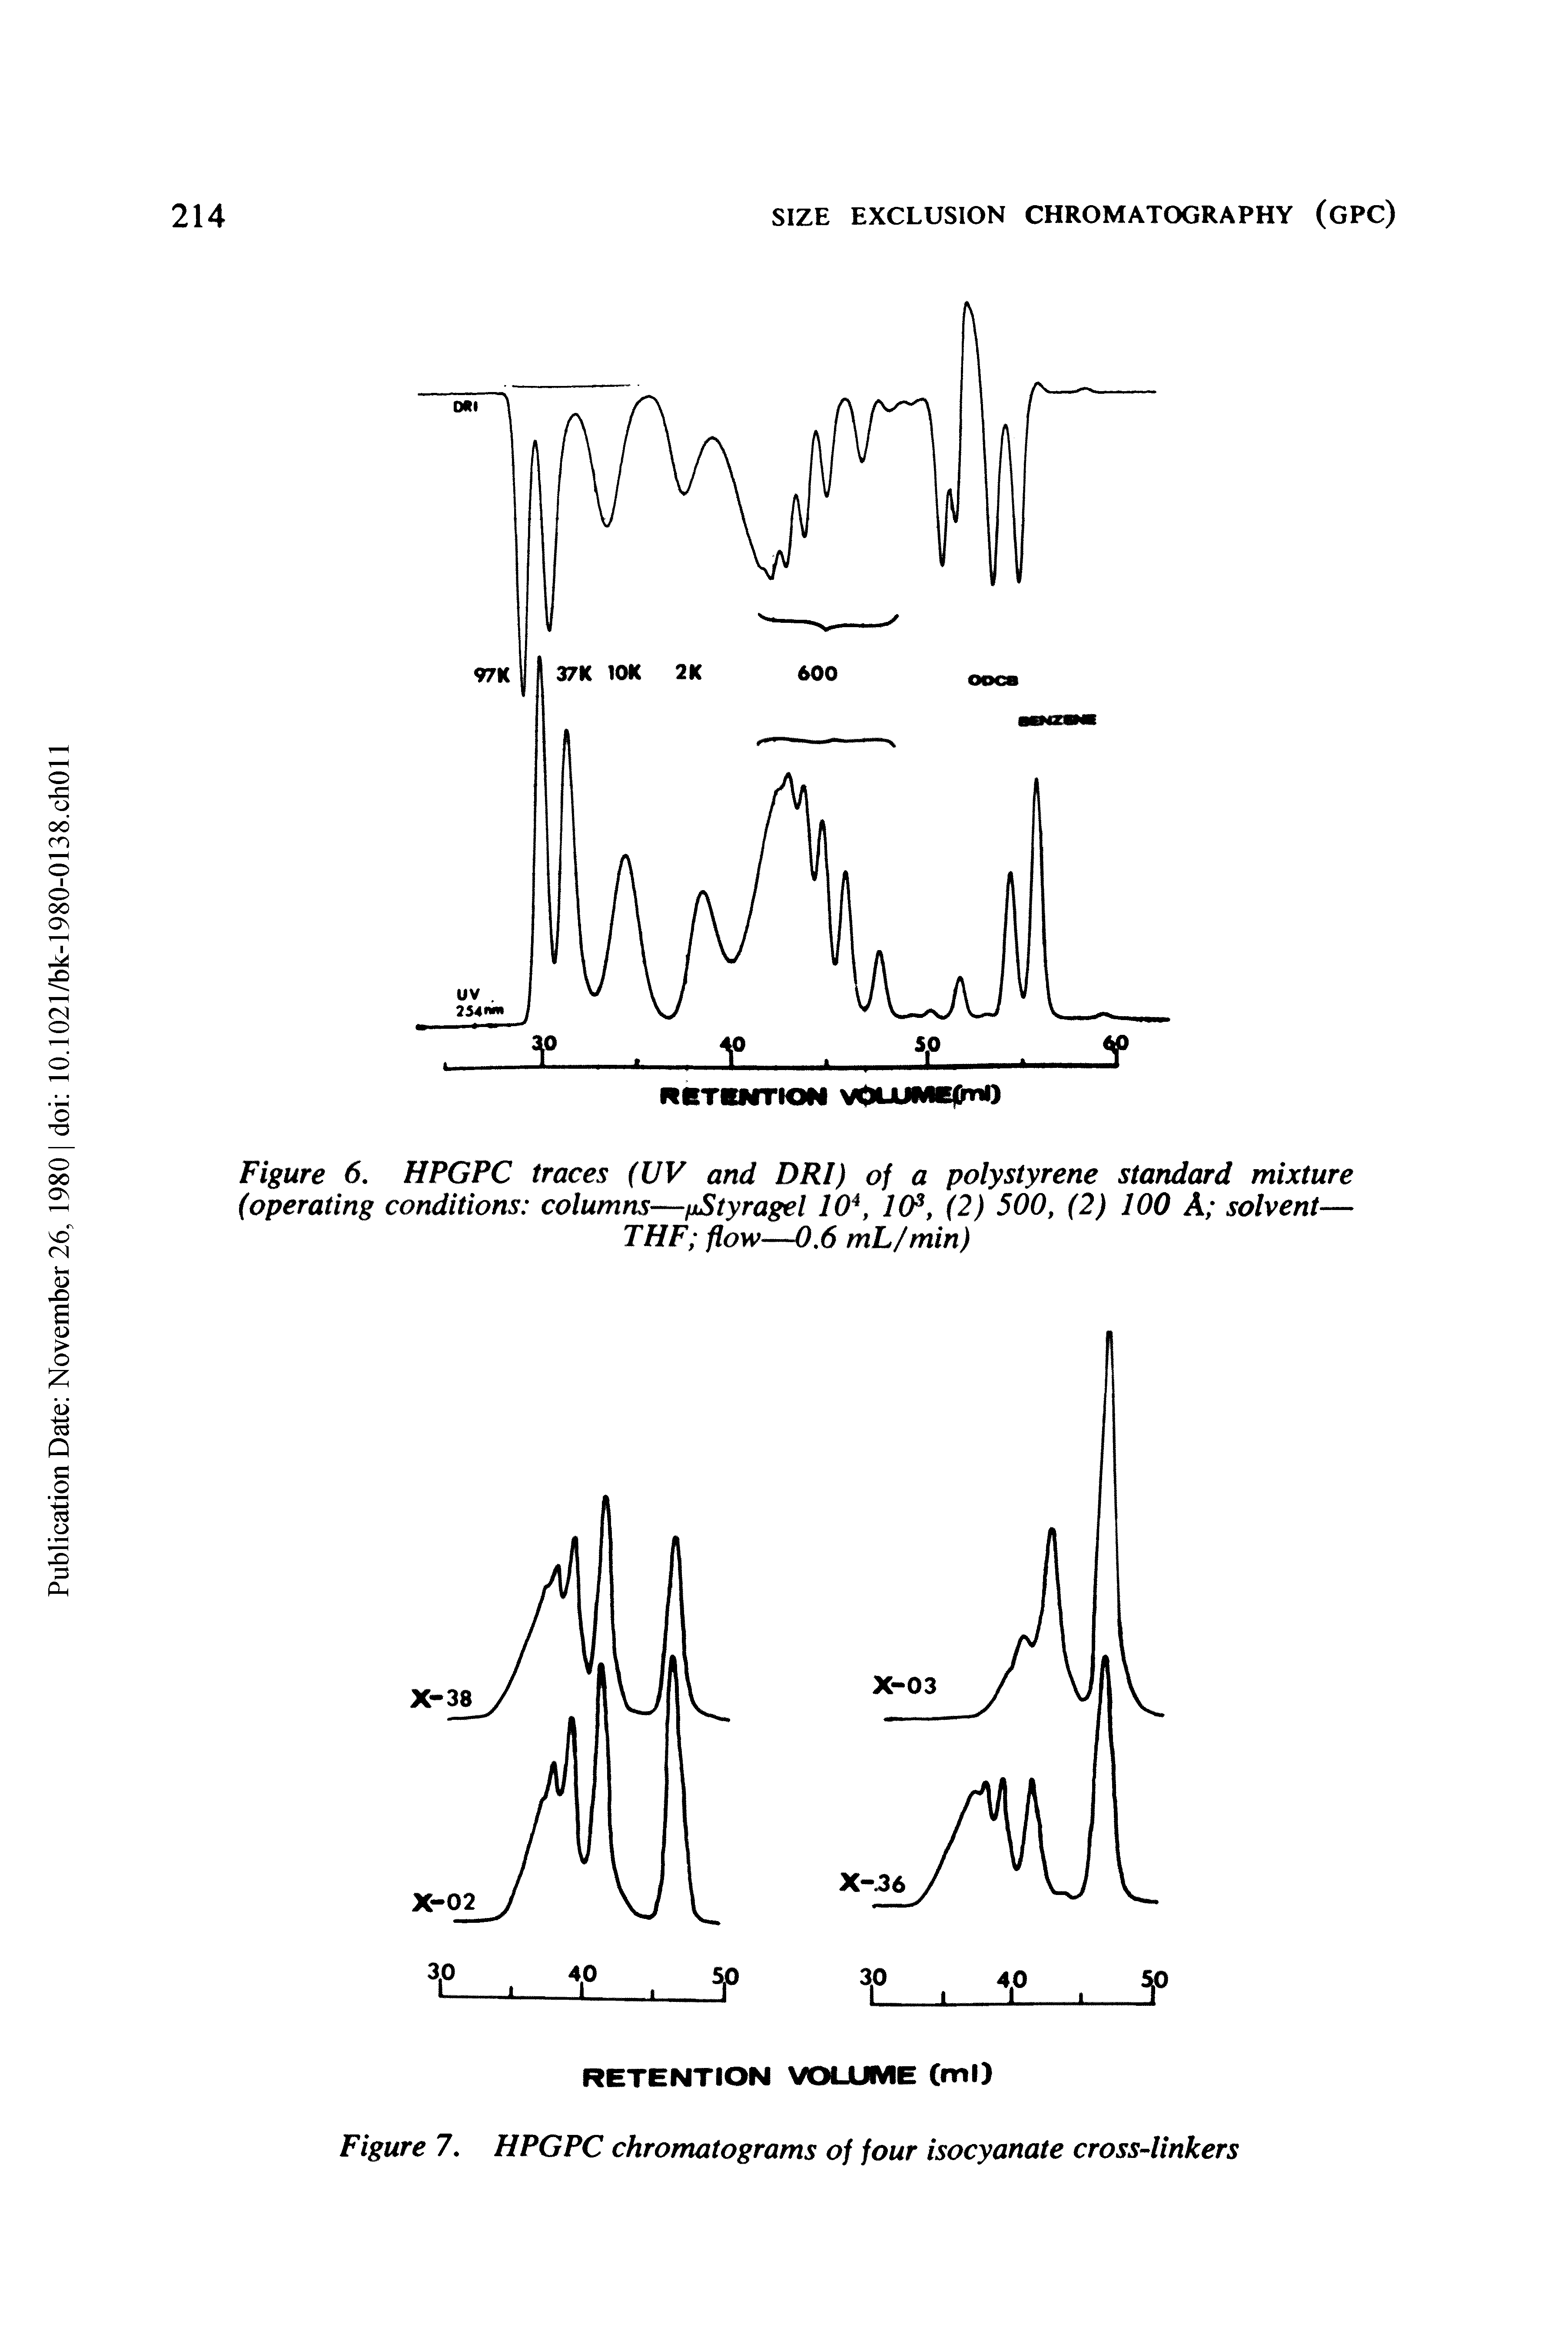 Figure 6. HPGPC traces (UV and DRl) of a polystyrene standard mixture (operating conditions columns—fxStyragel 10, 1, (2) 500, (2) 100 A solvent— THF flow—0.6 mL/min)...